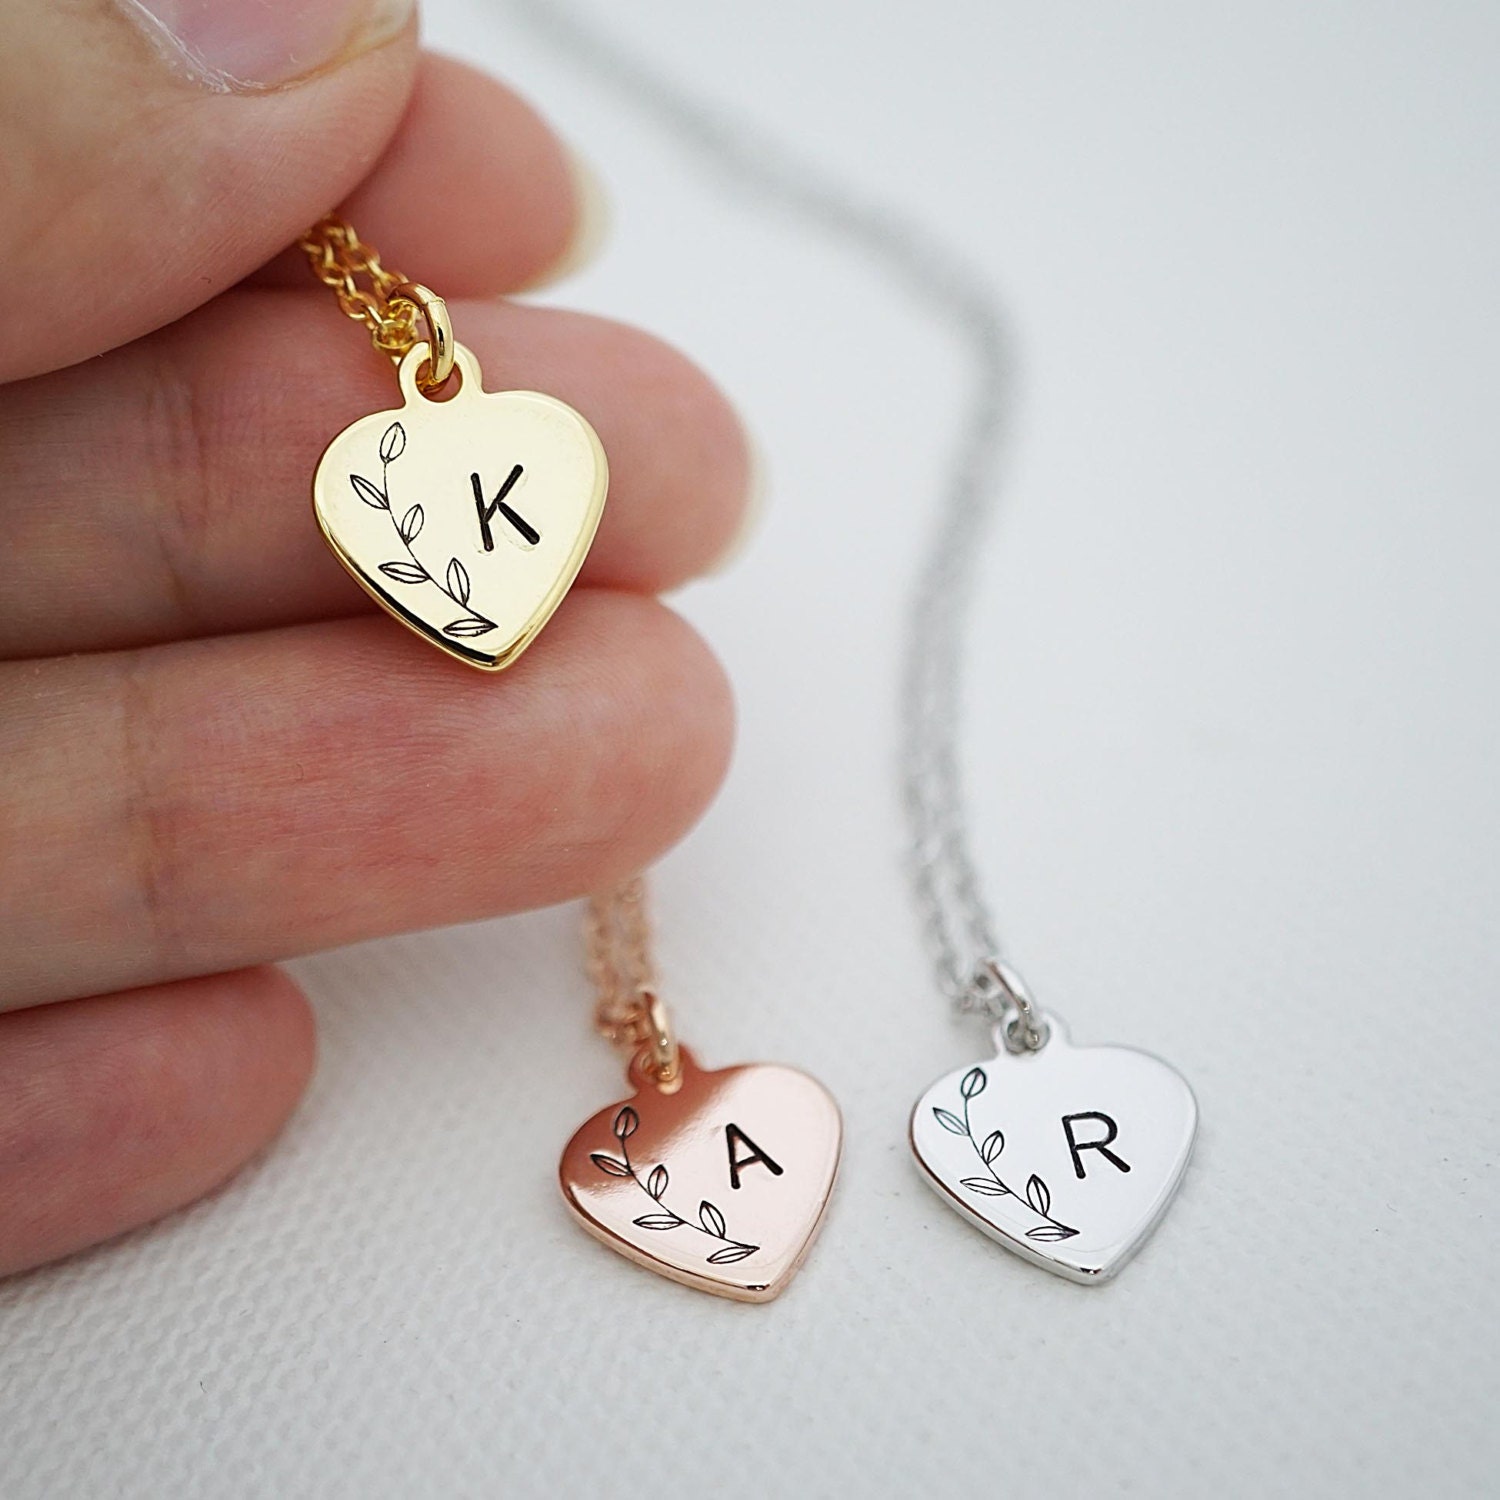 Heart Personalized Necklace Initial Necklace Heart necklace